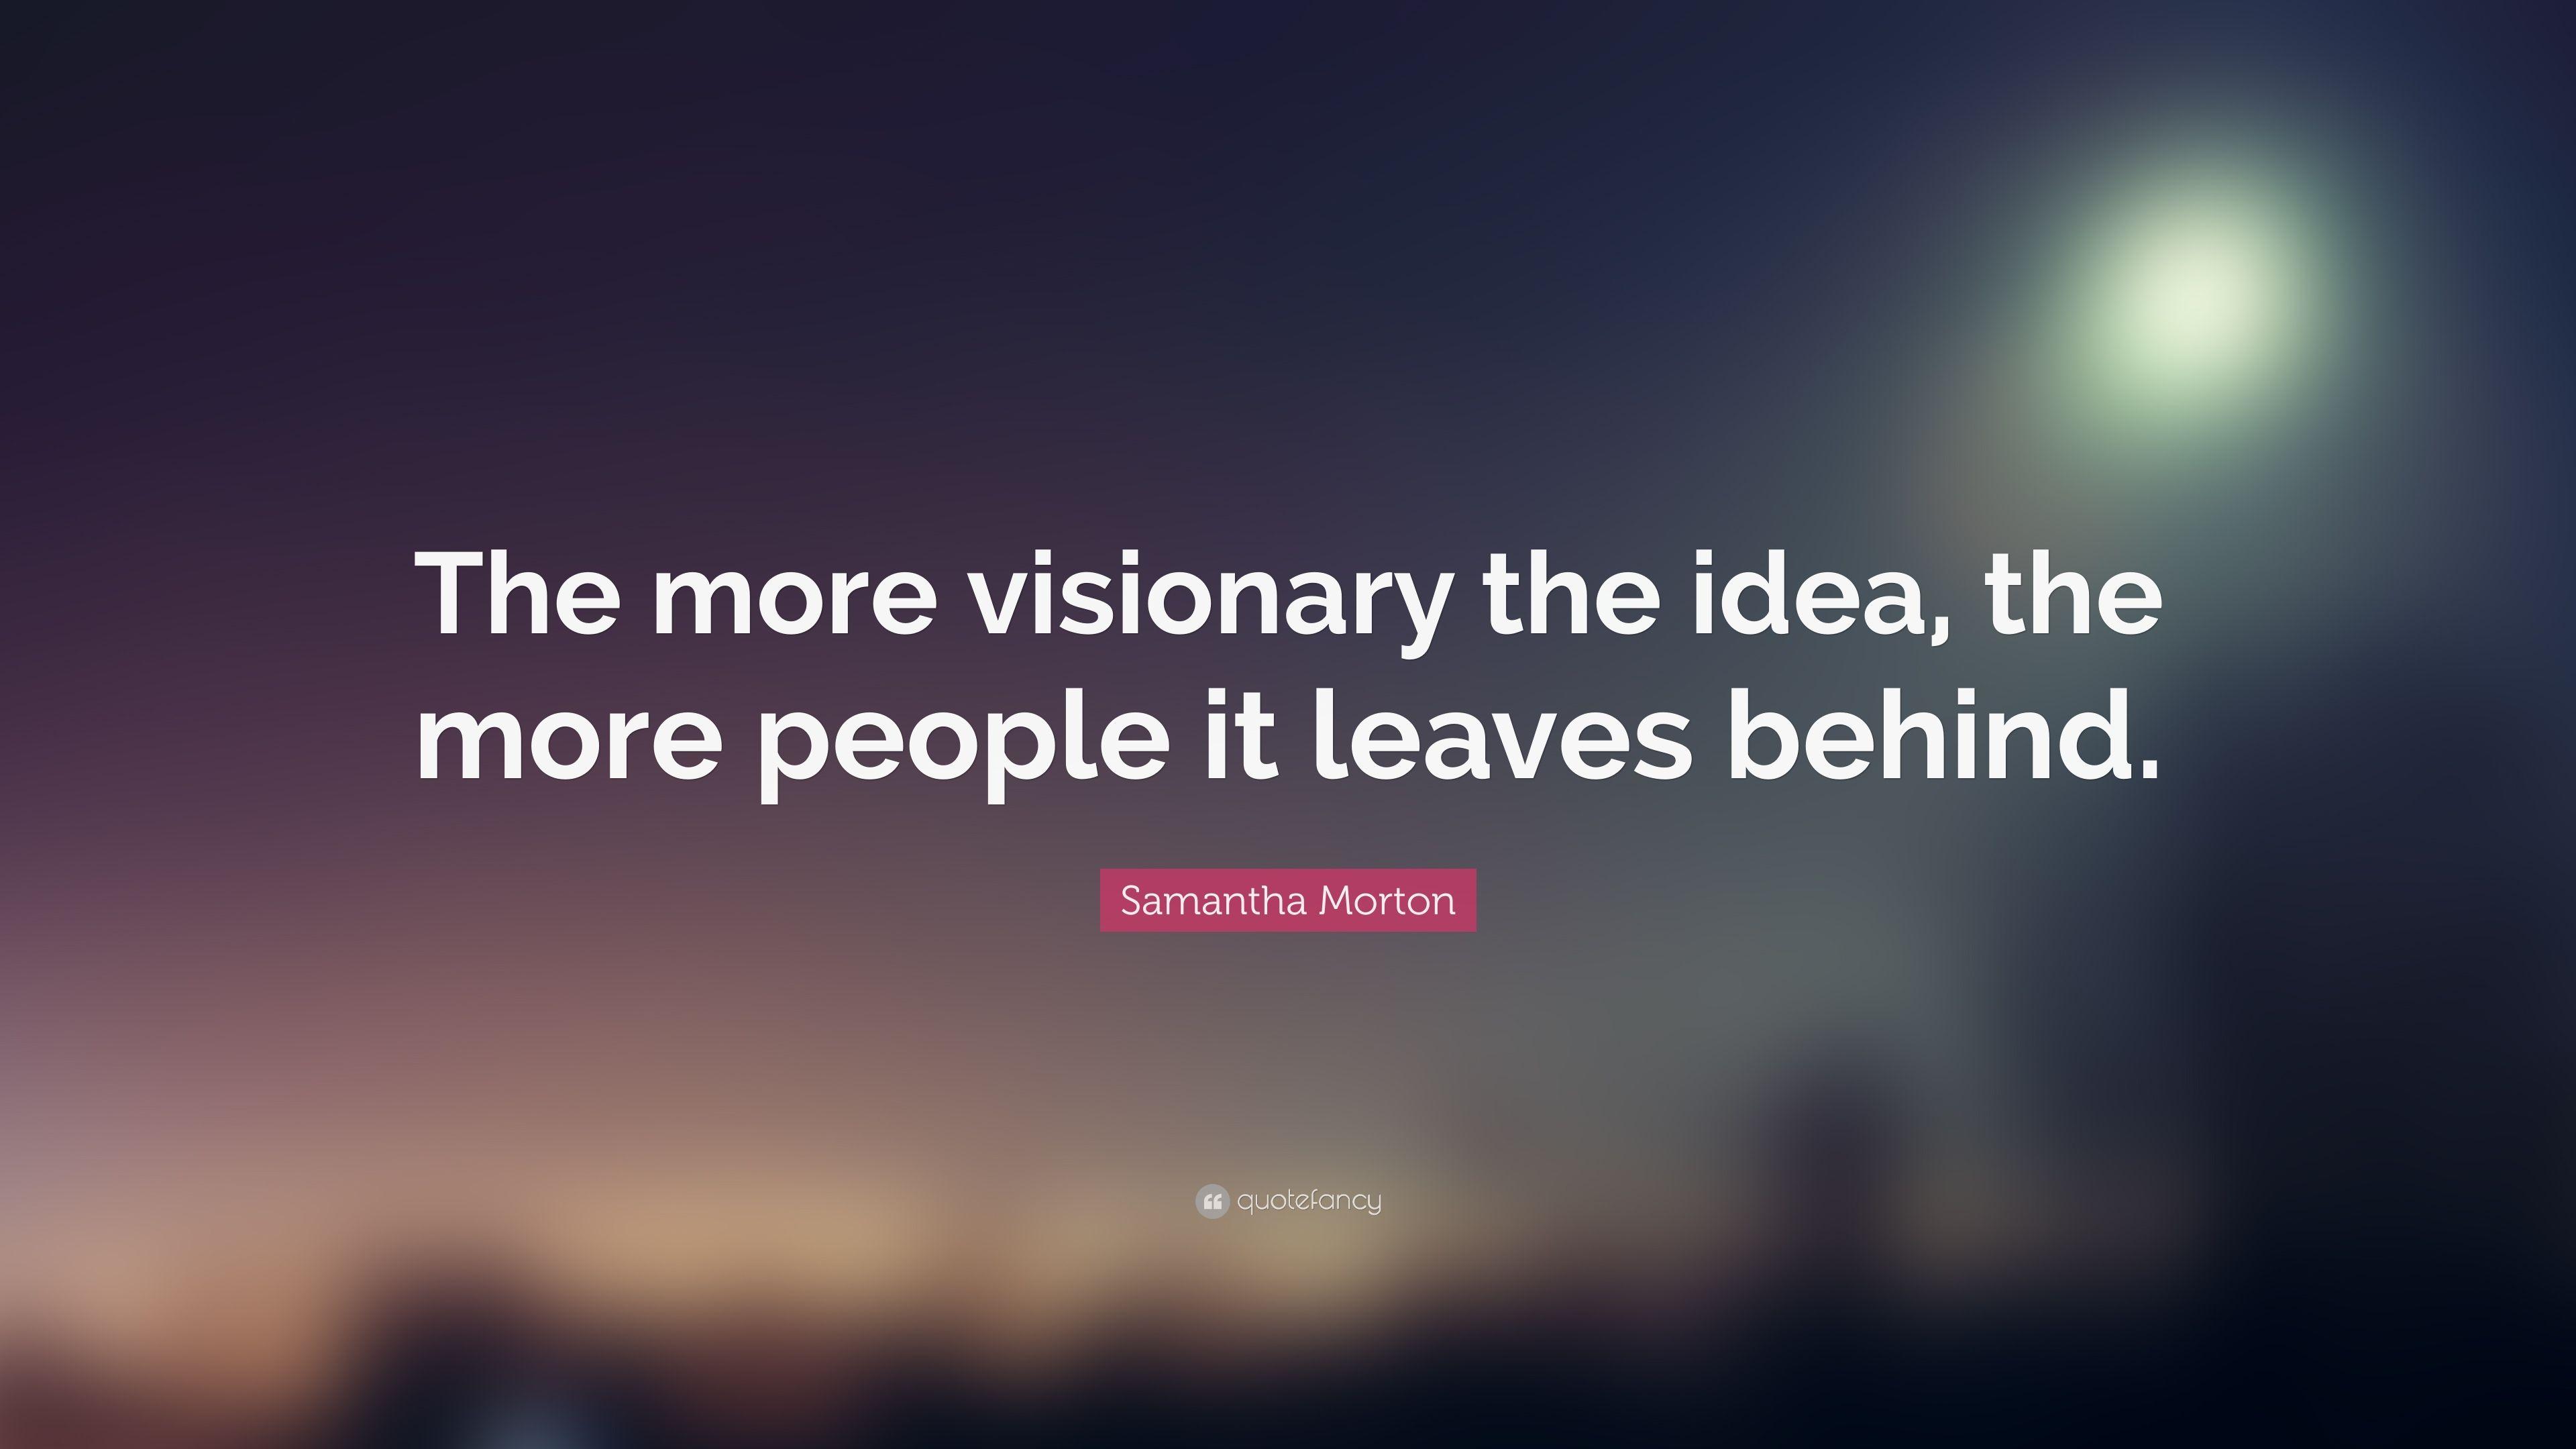 Samantha Morton Quote: “The more visionary the idea, the more people